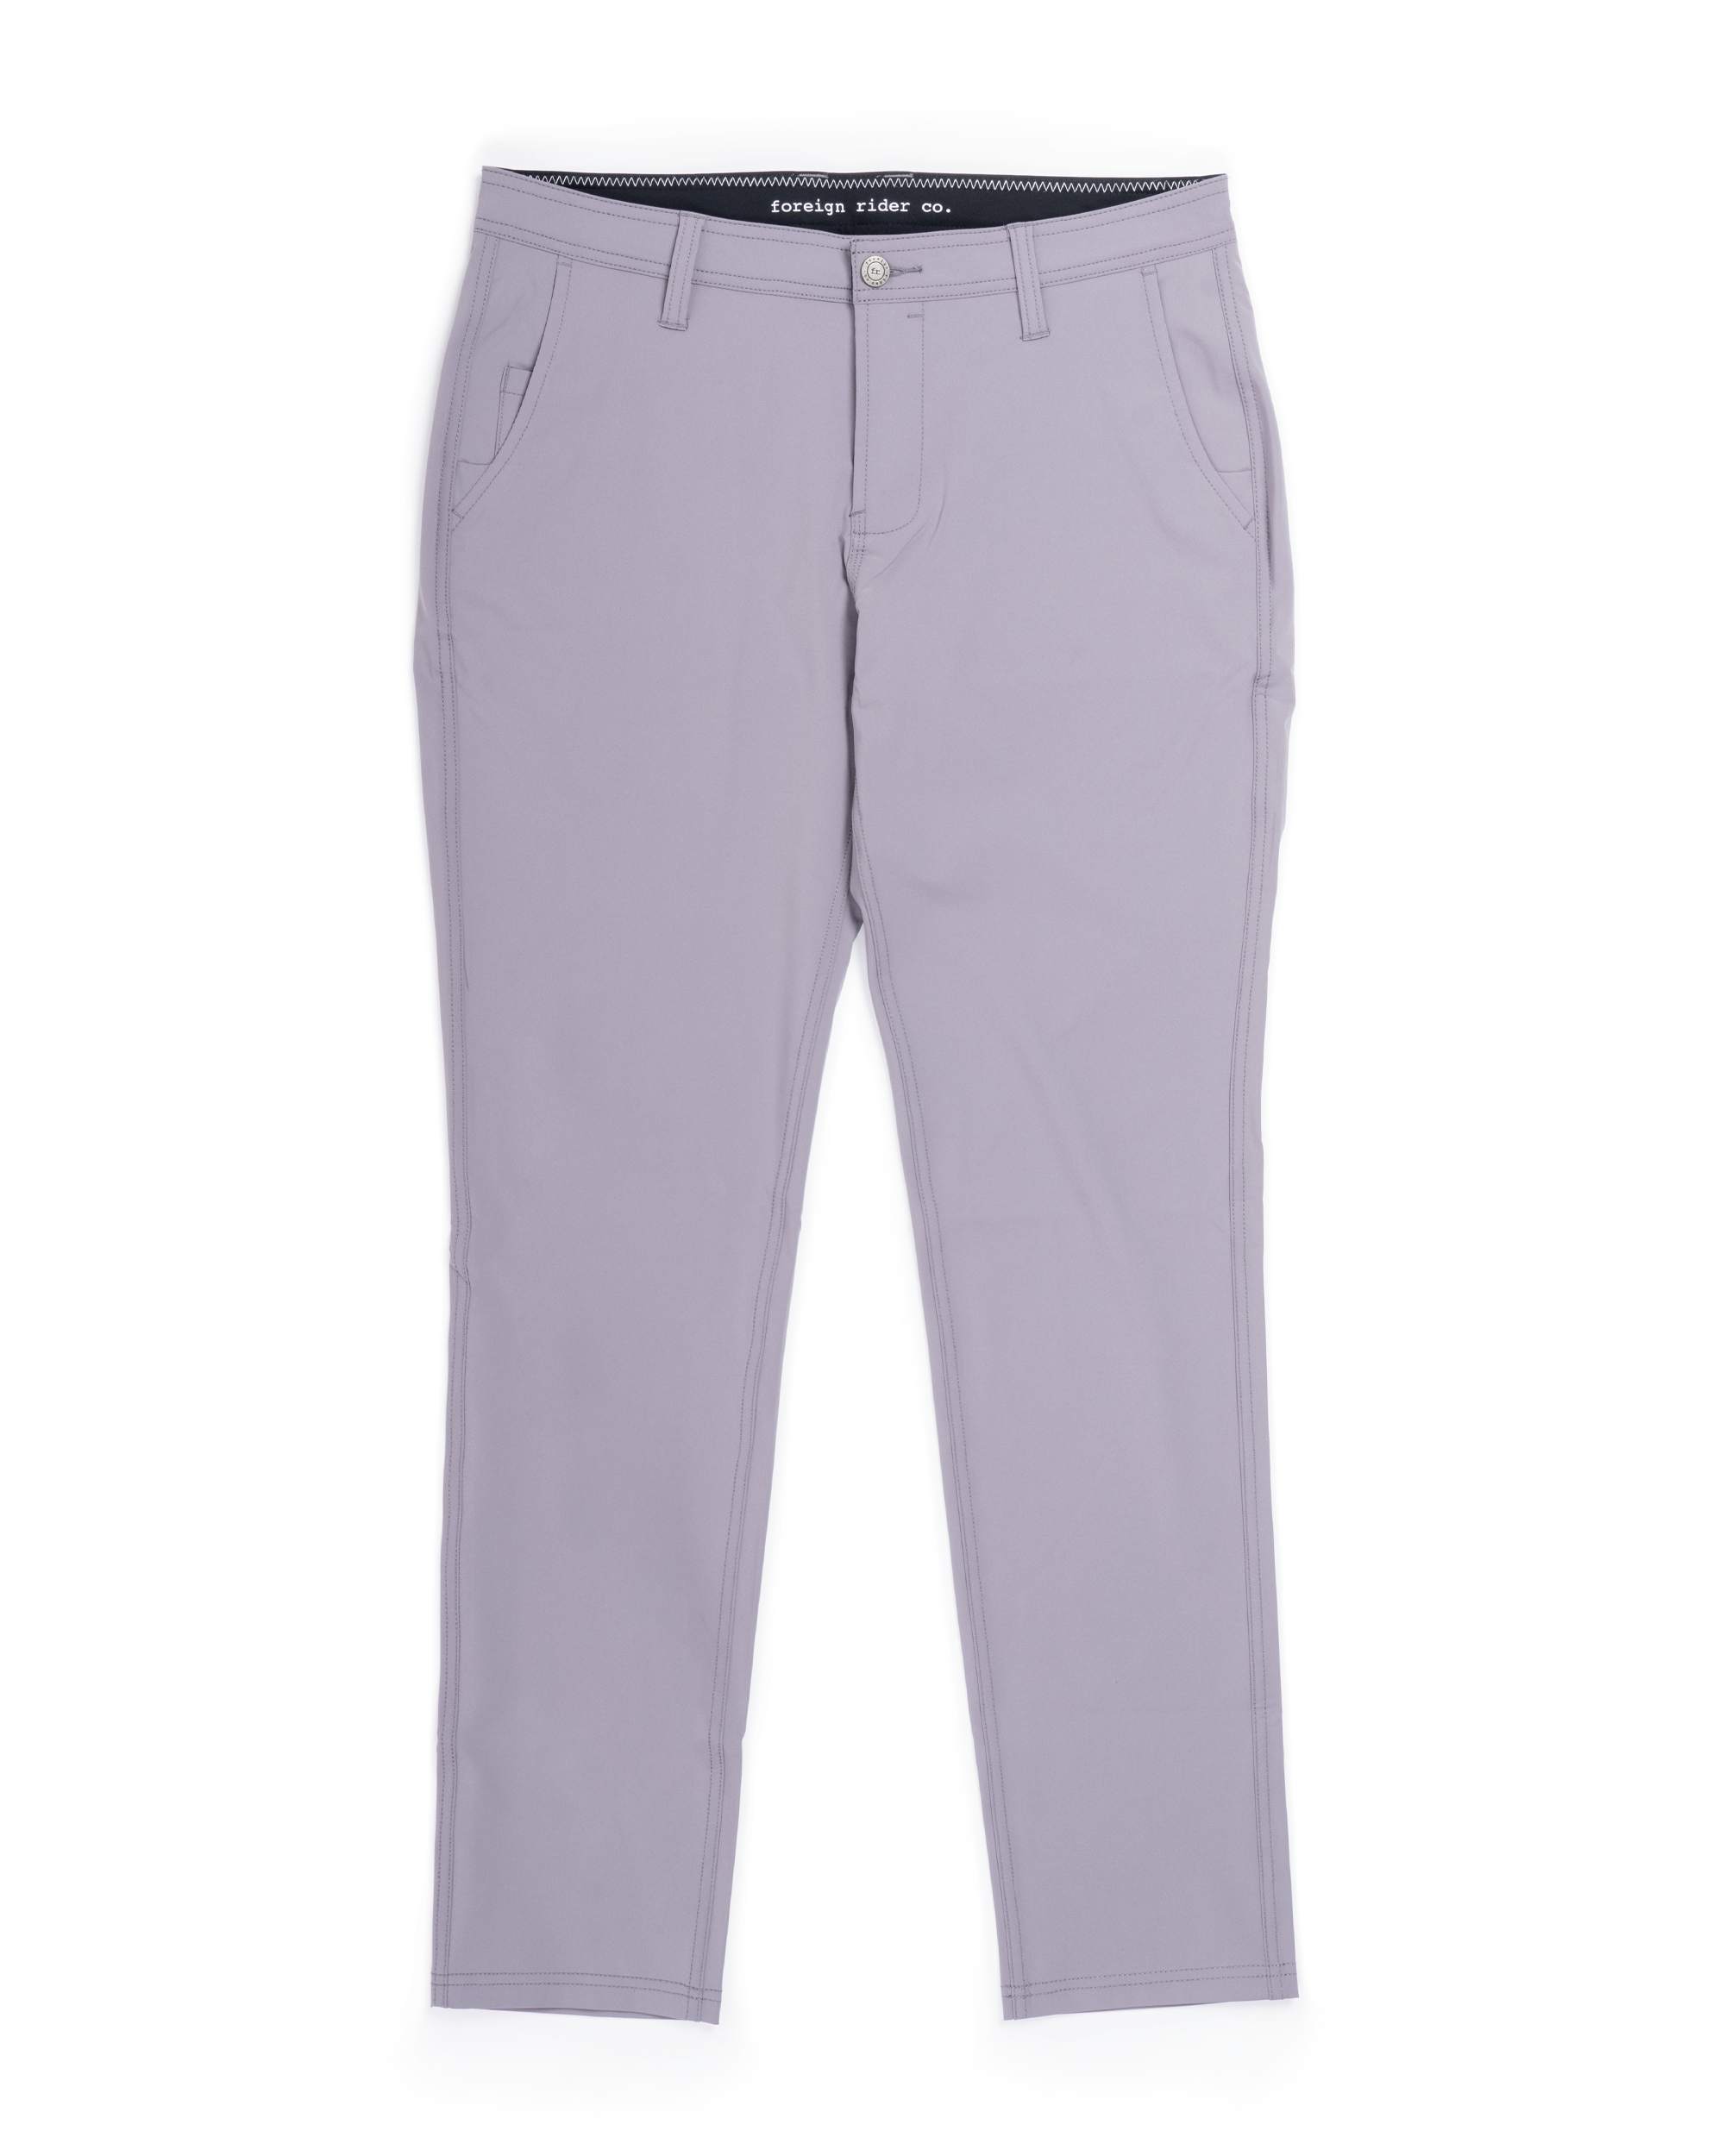 Performance Pants Grey - Foreign Rider Co.